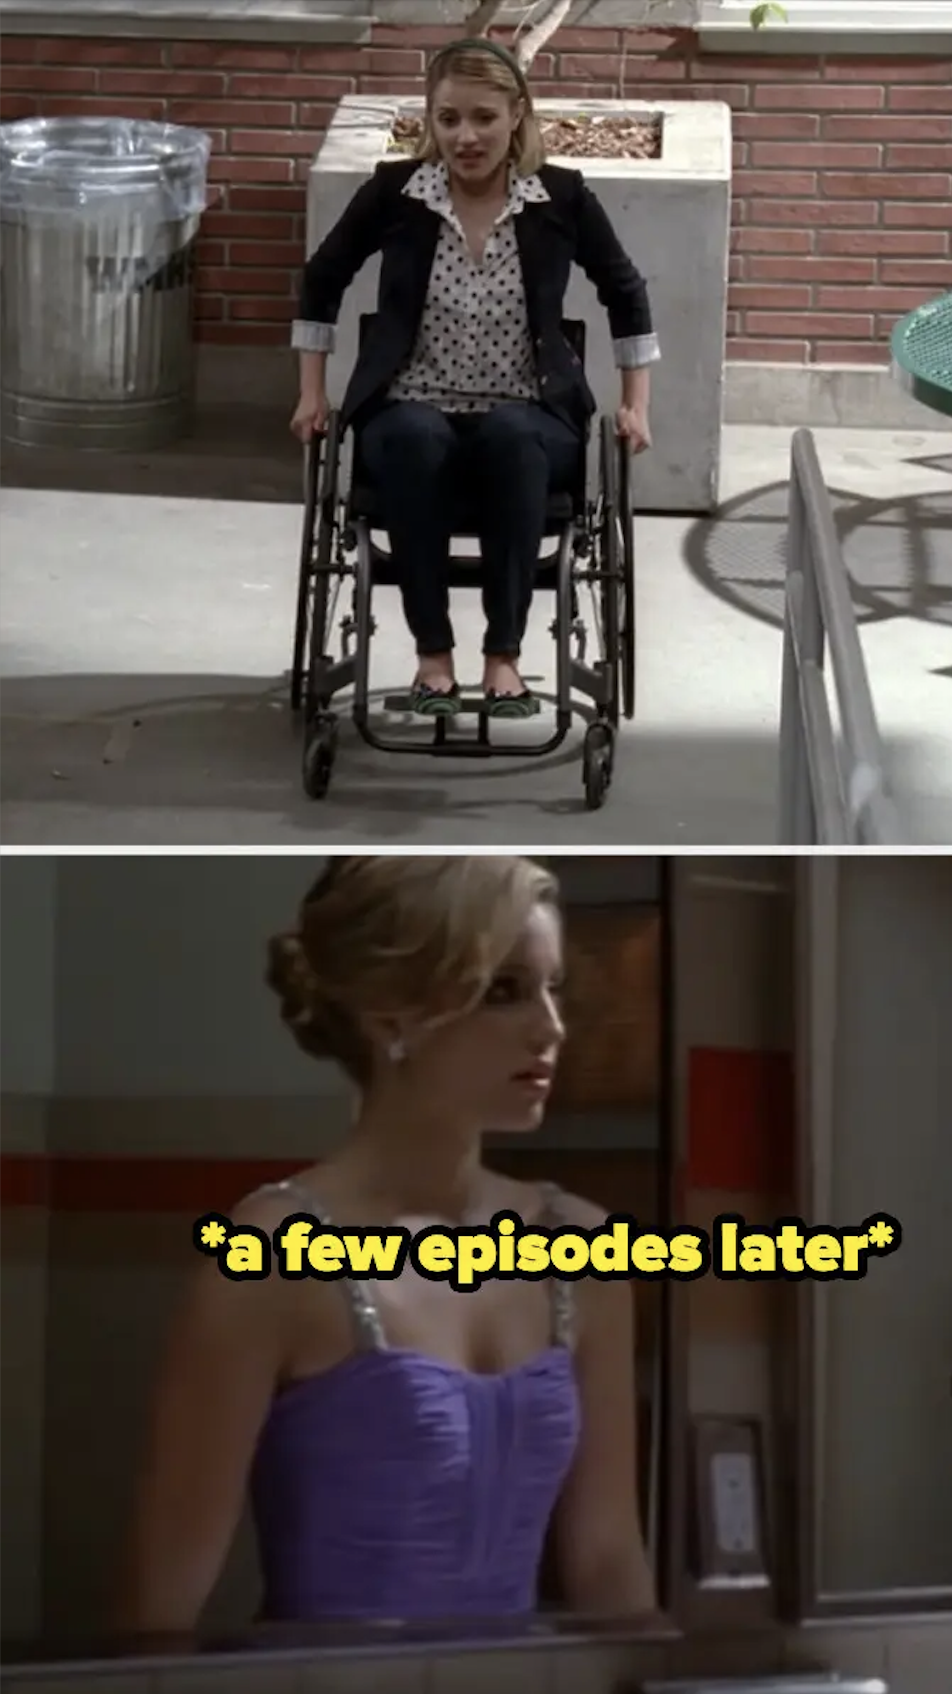 Quinn in the wheelchair and then later standing at the bathroom mirror